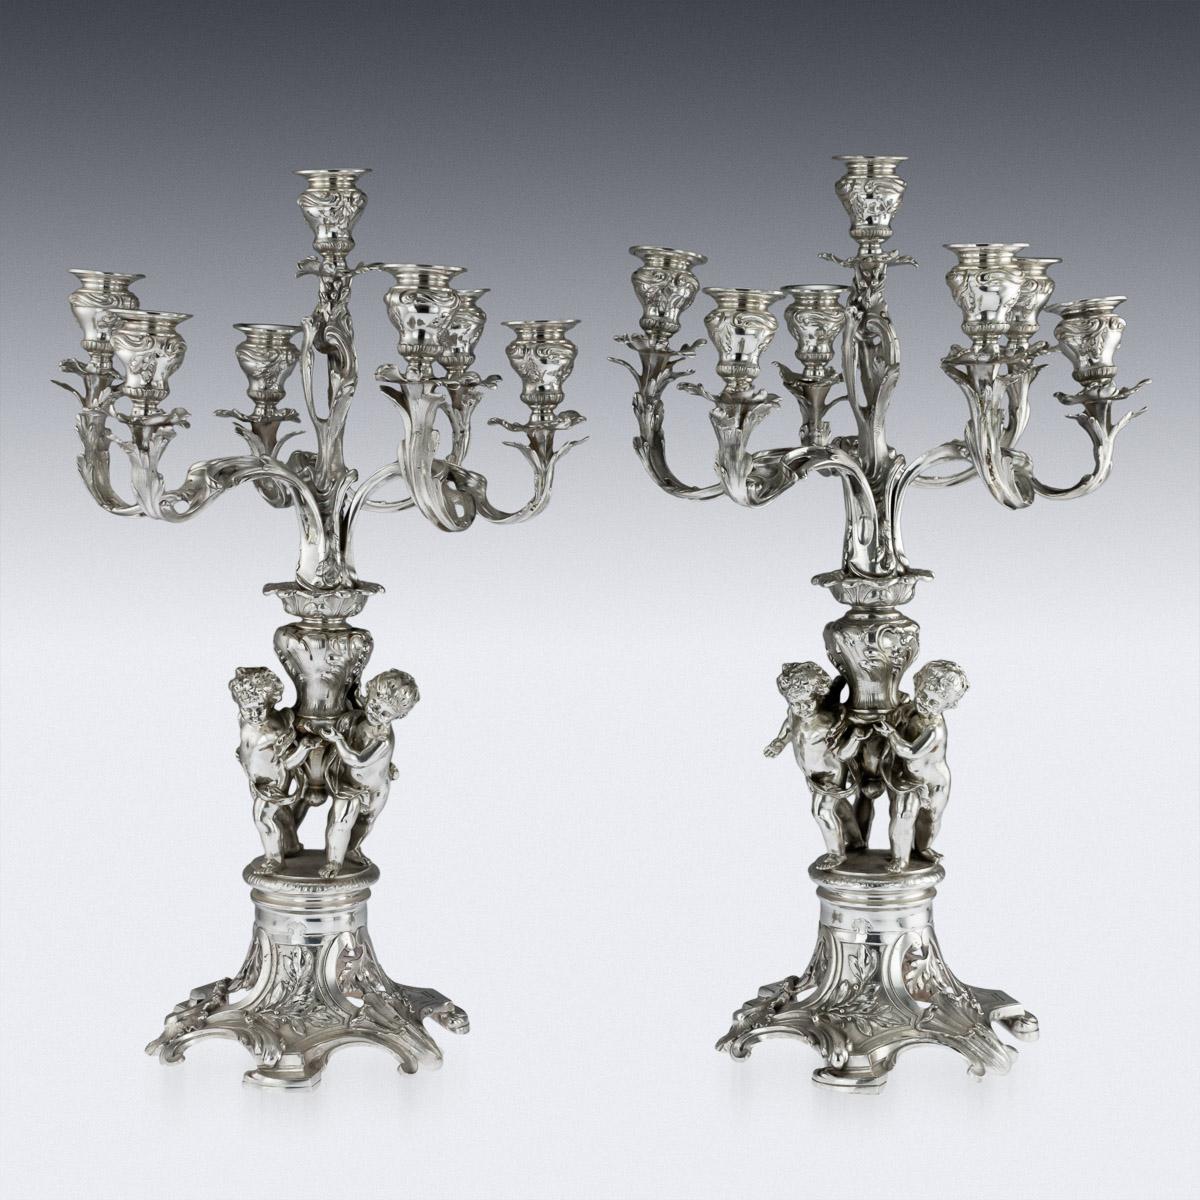 Antique late 19th century Austrian pair of magnificent seven-light candelabra, large and exceptional quality, in the Louis XV style, the foot pierced with oak foliage, the stem shaped as three putti, supporting seven laurel leaf branches, the tops